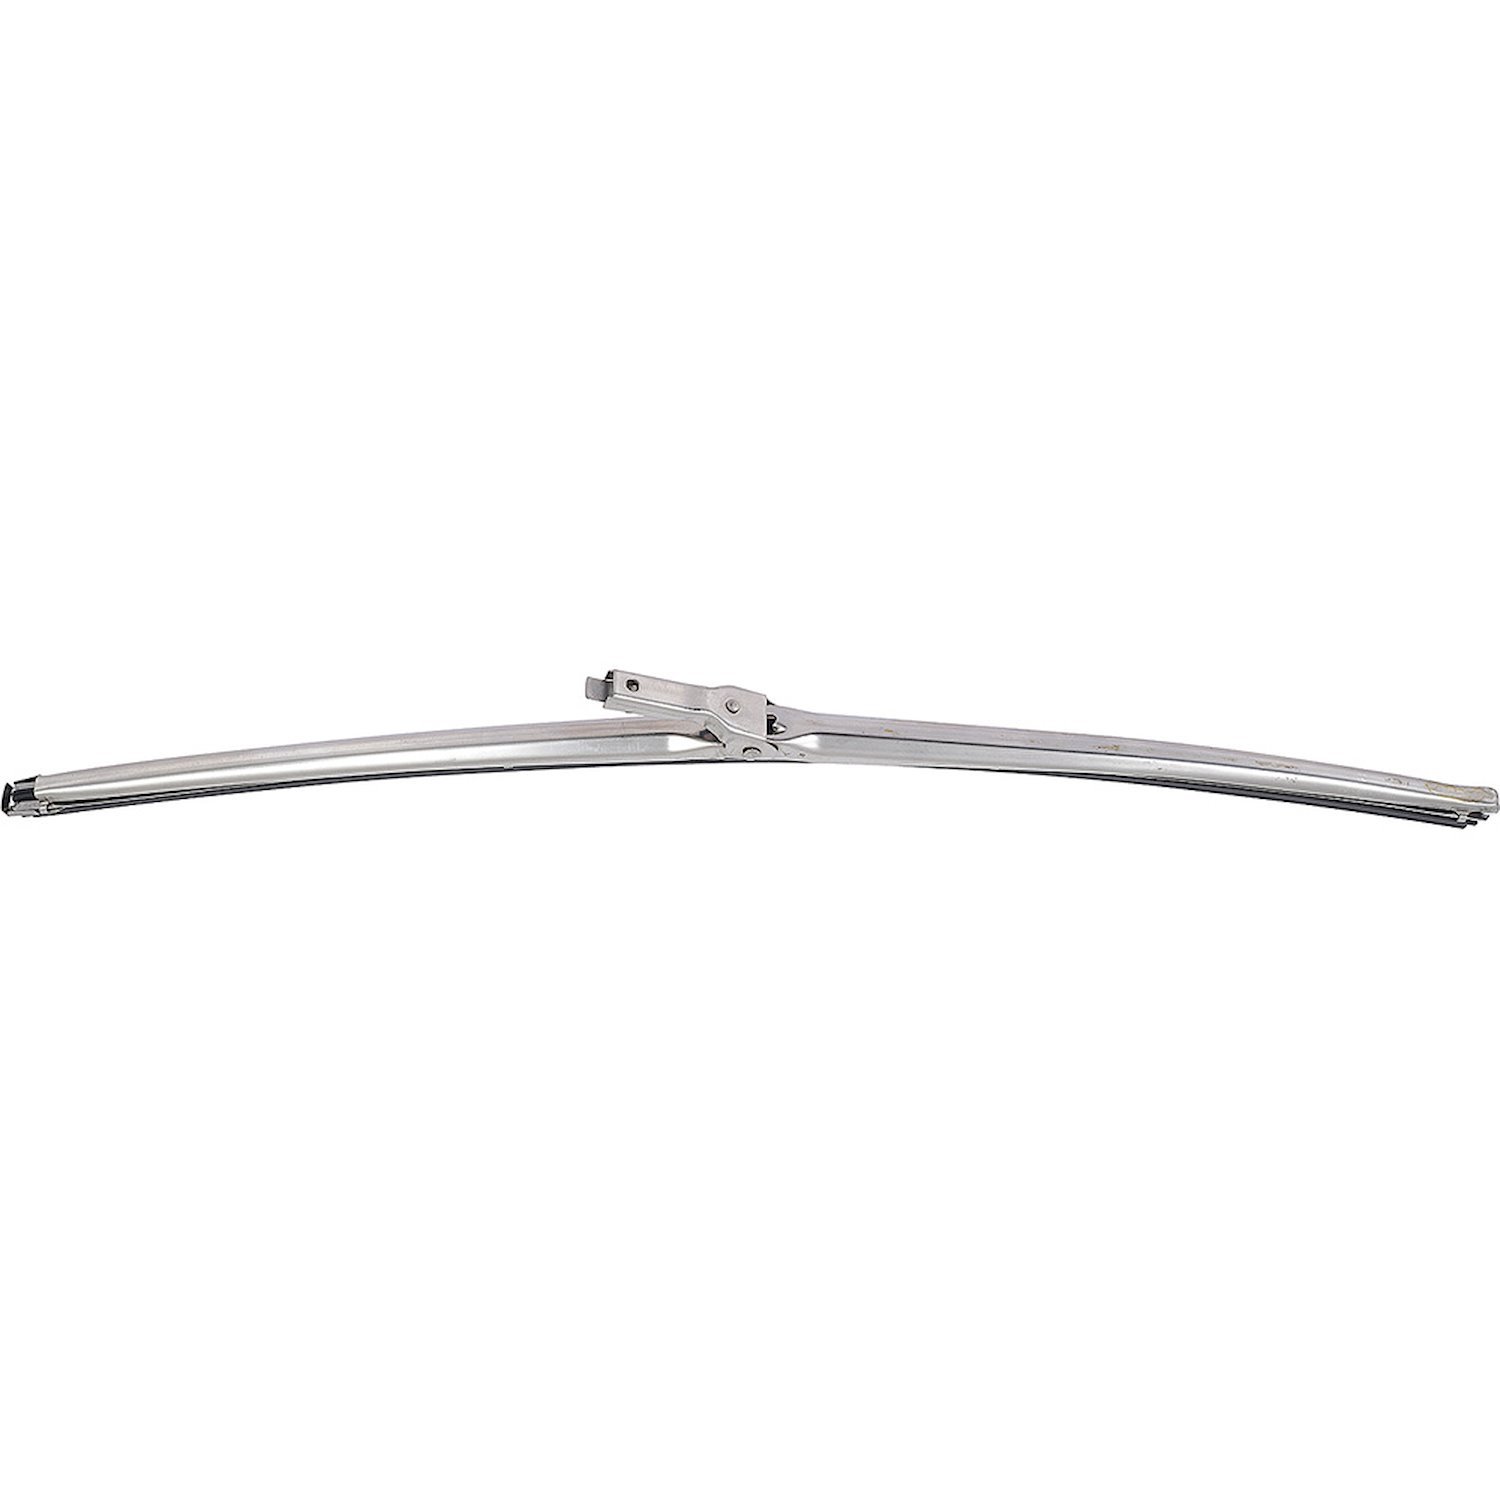 Reproduction Windshield Wiper Blade; 15